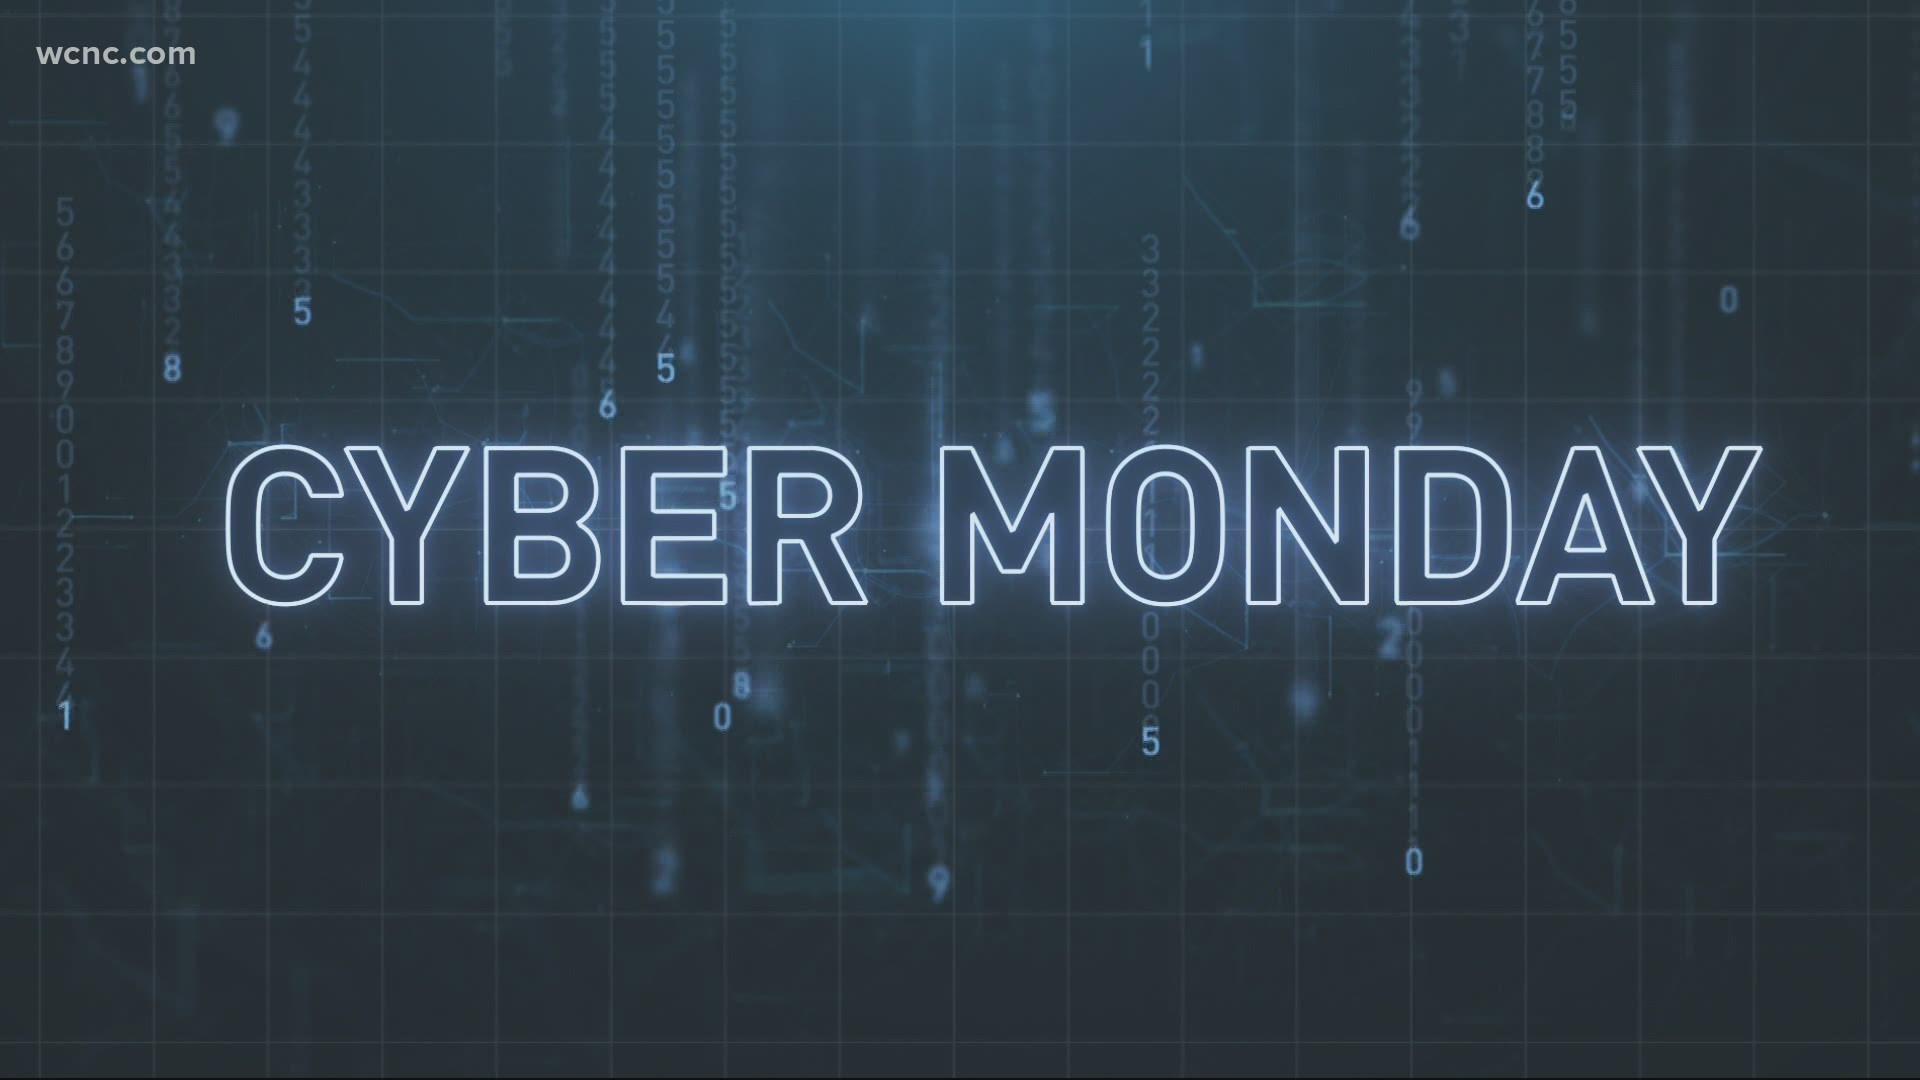 Cyber Monday is expected to break spending records after an estimated 9 billion was spent on Black Friday.